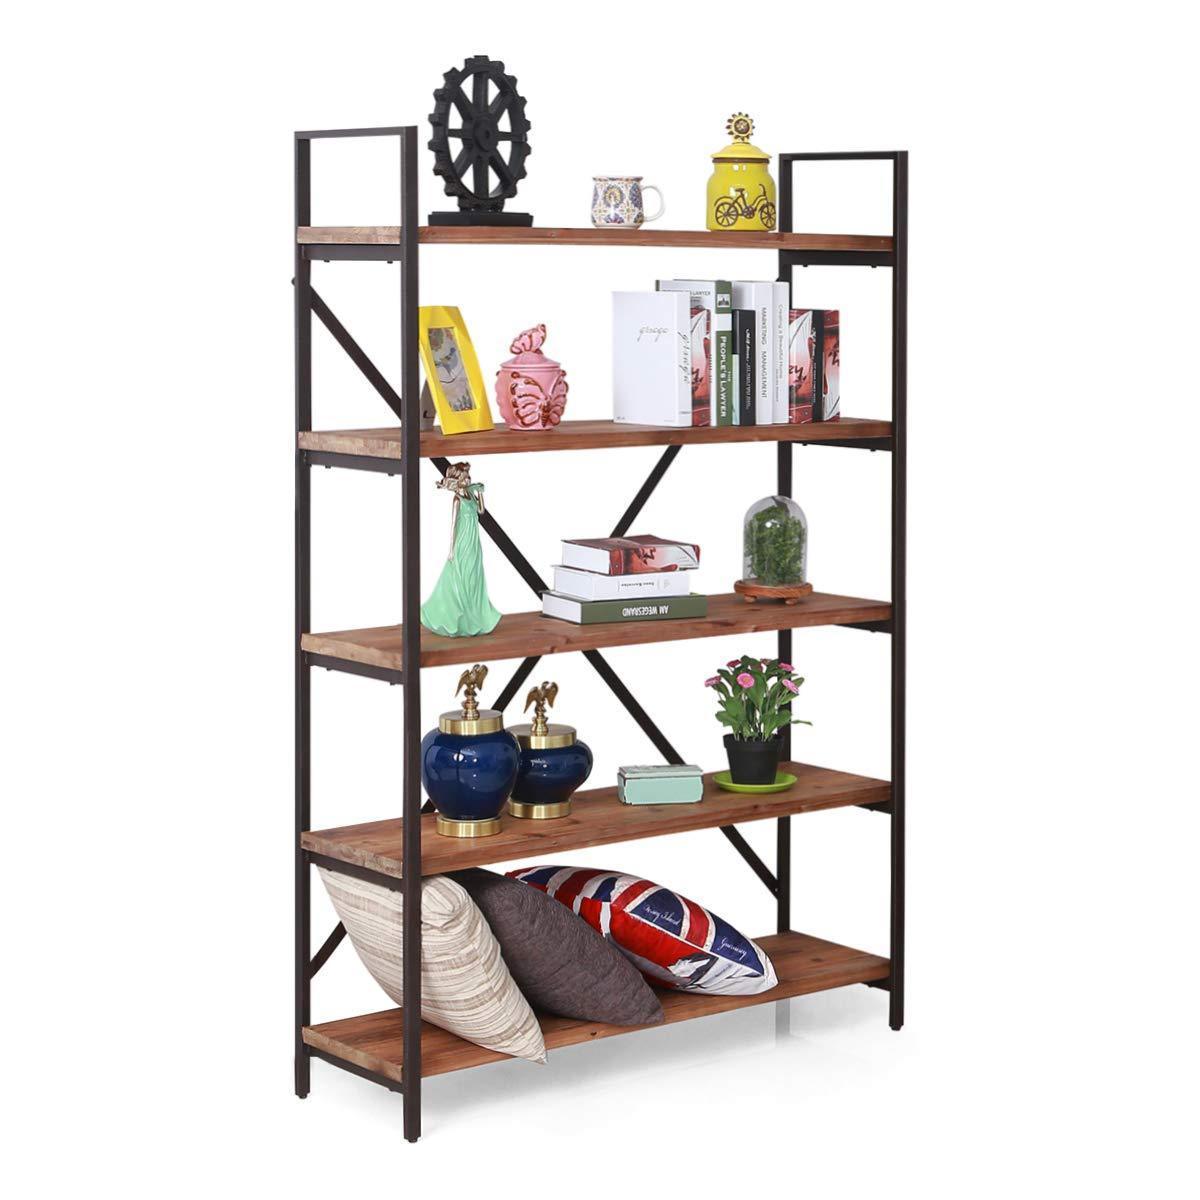 Get care royal vintage 5 tier open back storage bookshelf industrial 69 5 inches h bookcase decor display shelf living room home office natural solid reclaimed wood sturdy rustic brown metal frame